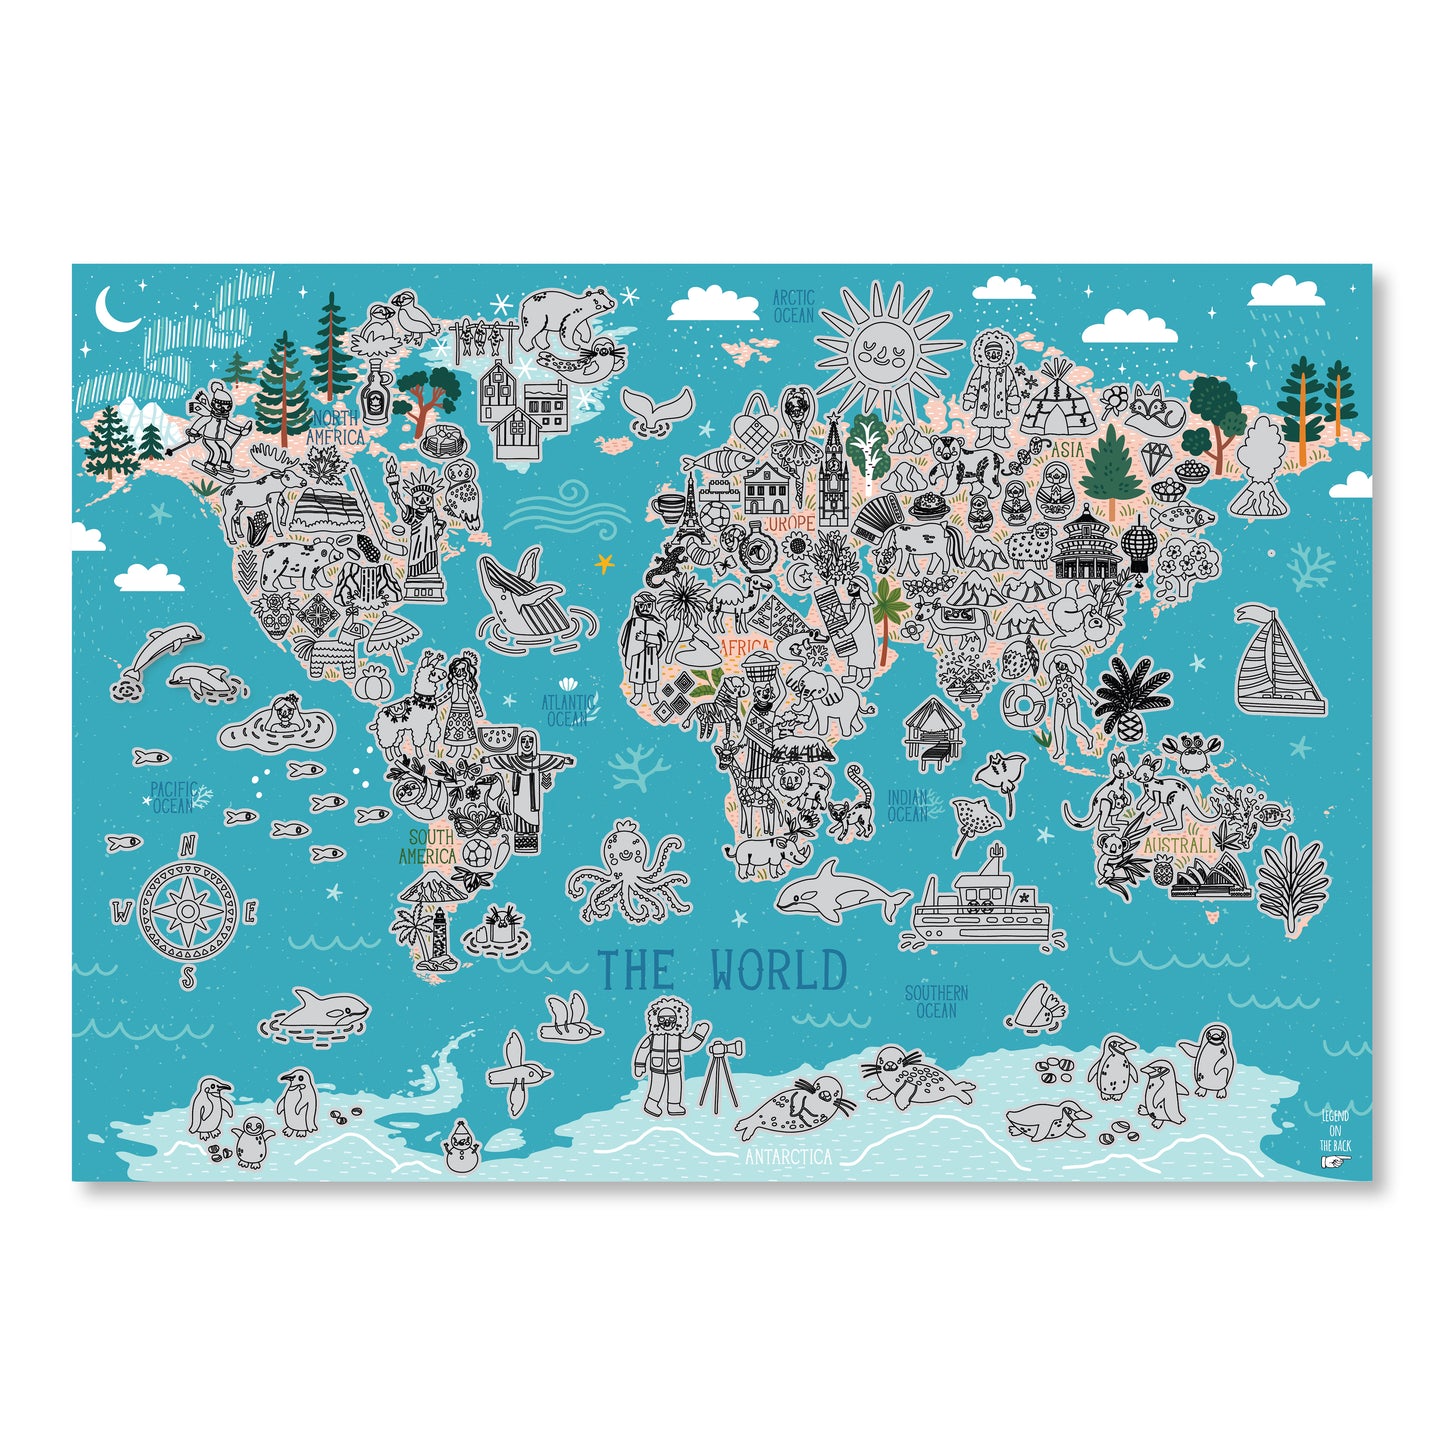 The World pictographic scratch off map